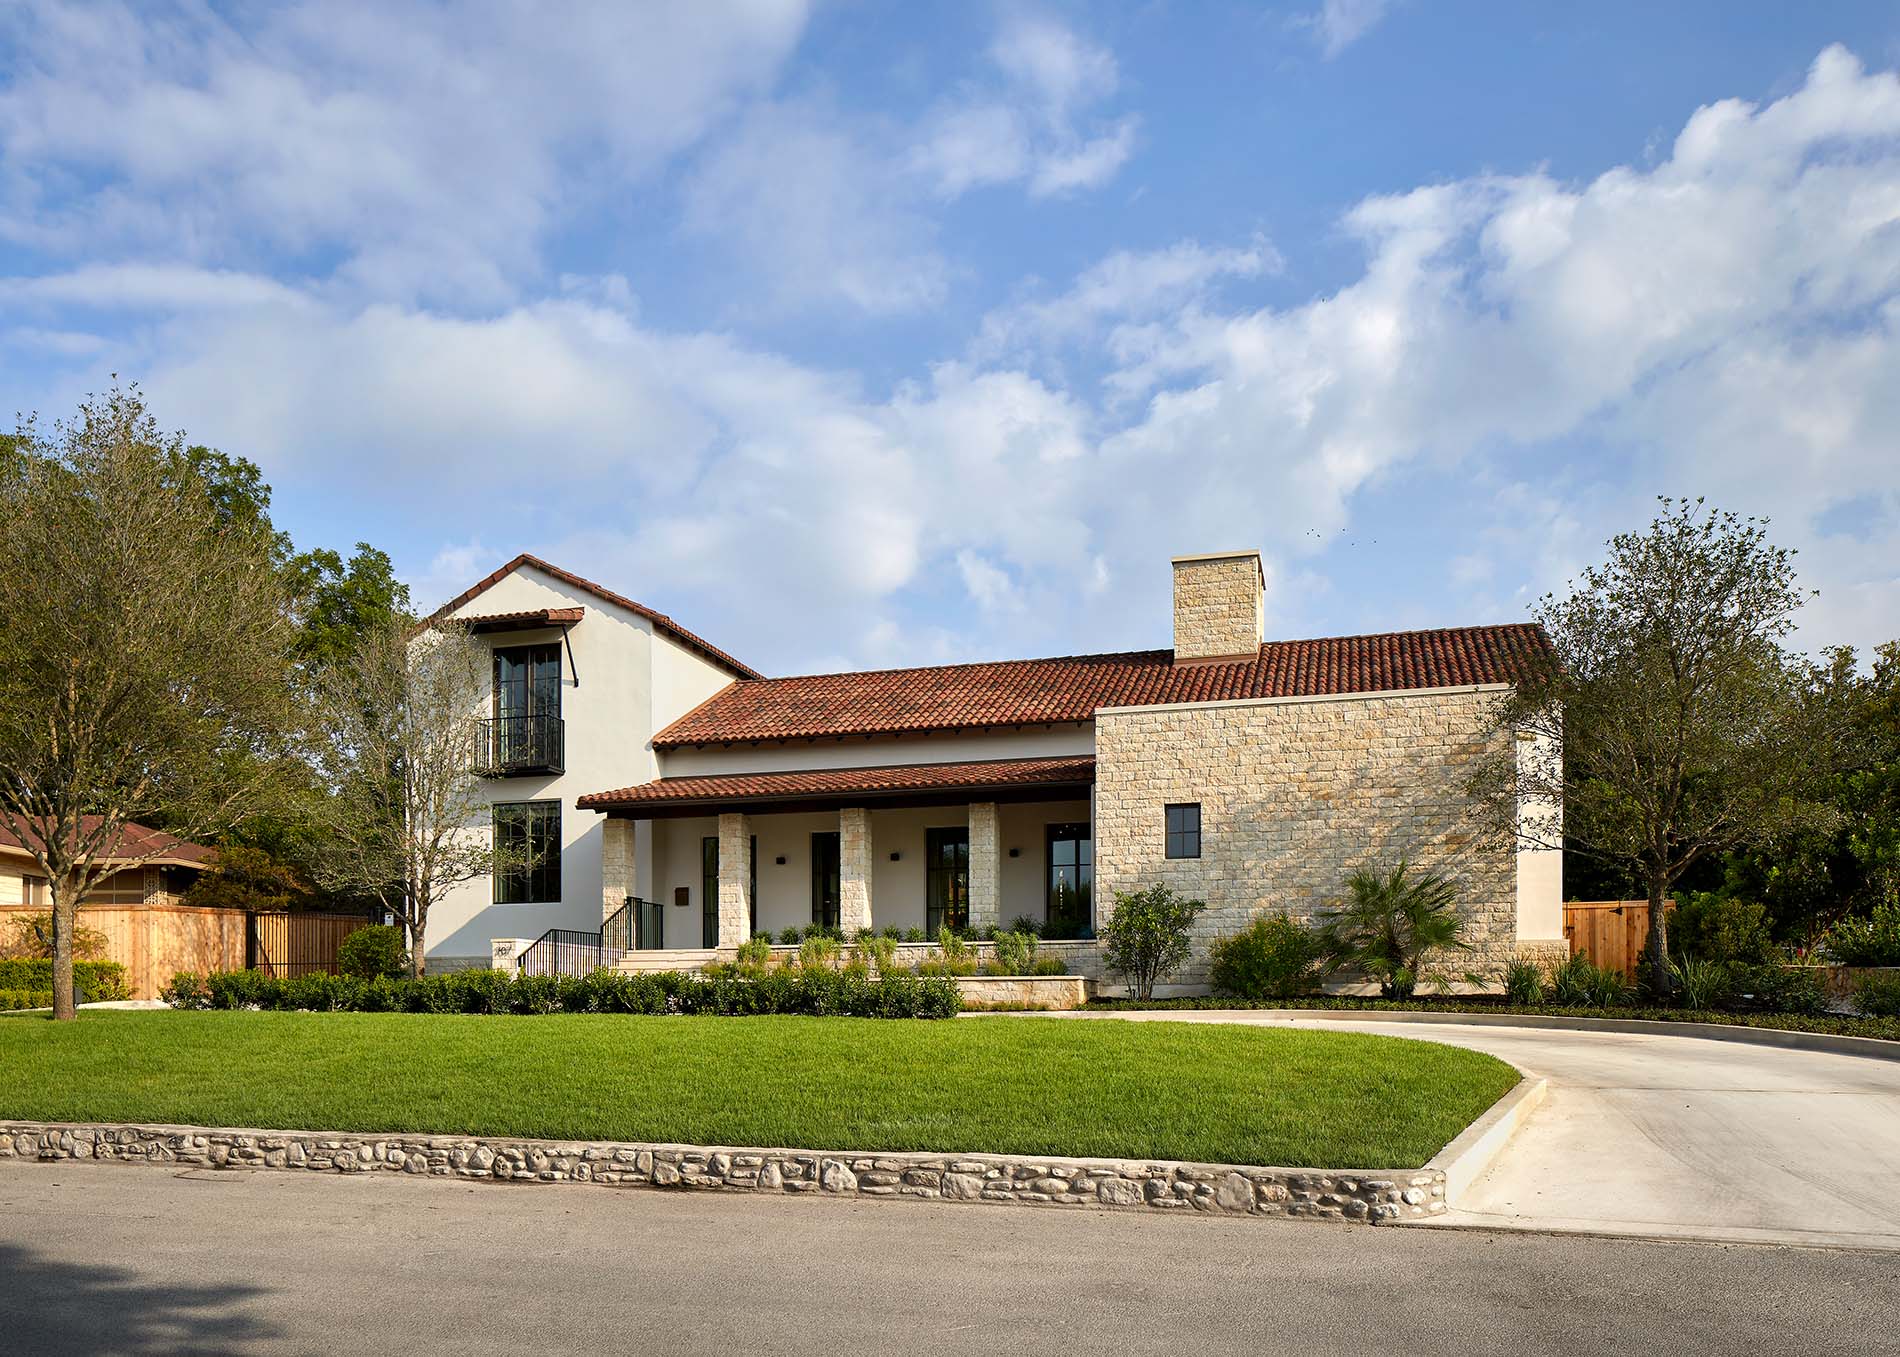 Spanish style stucco home with new replacement windows